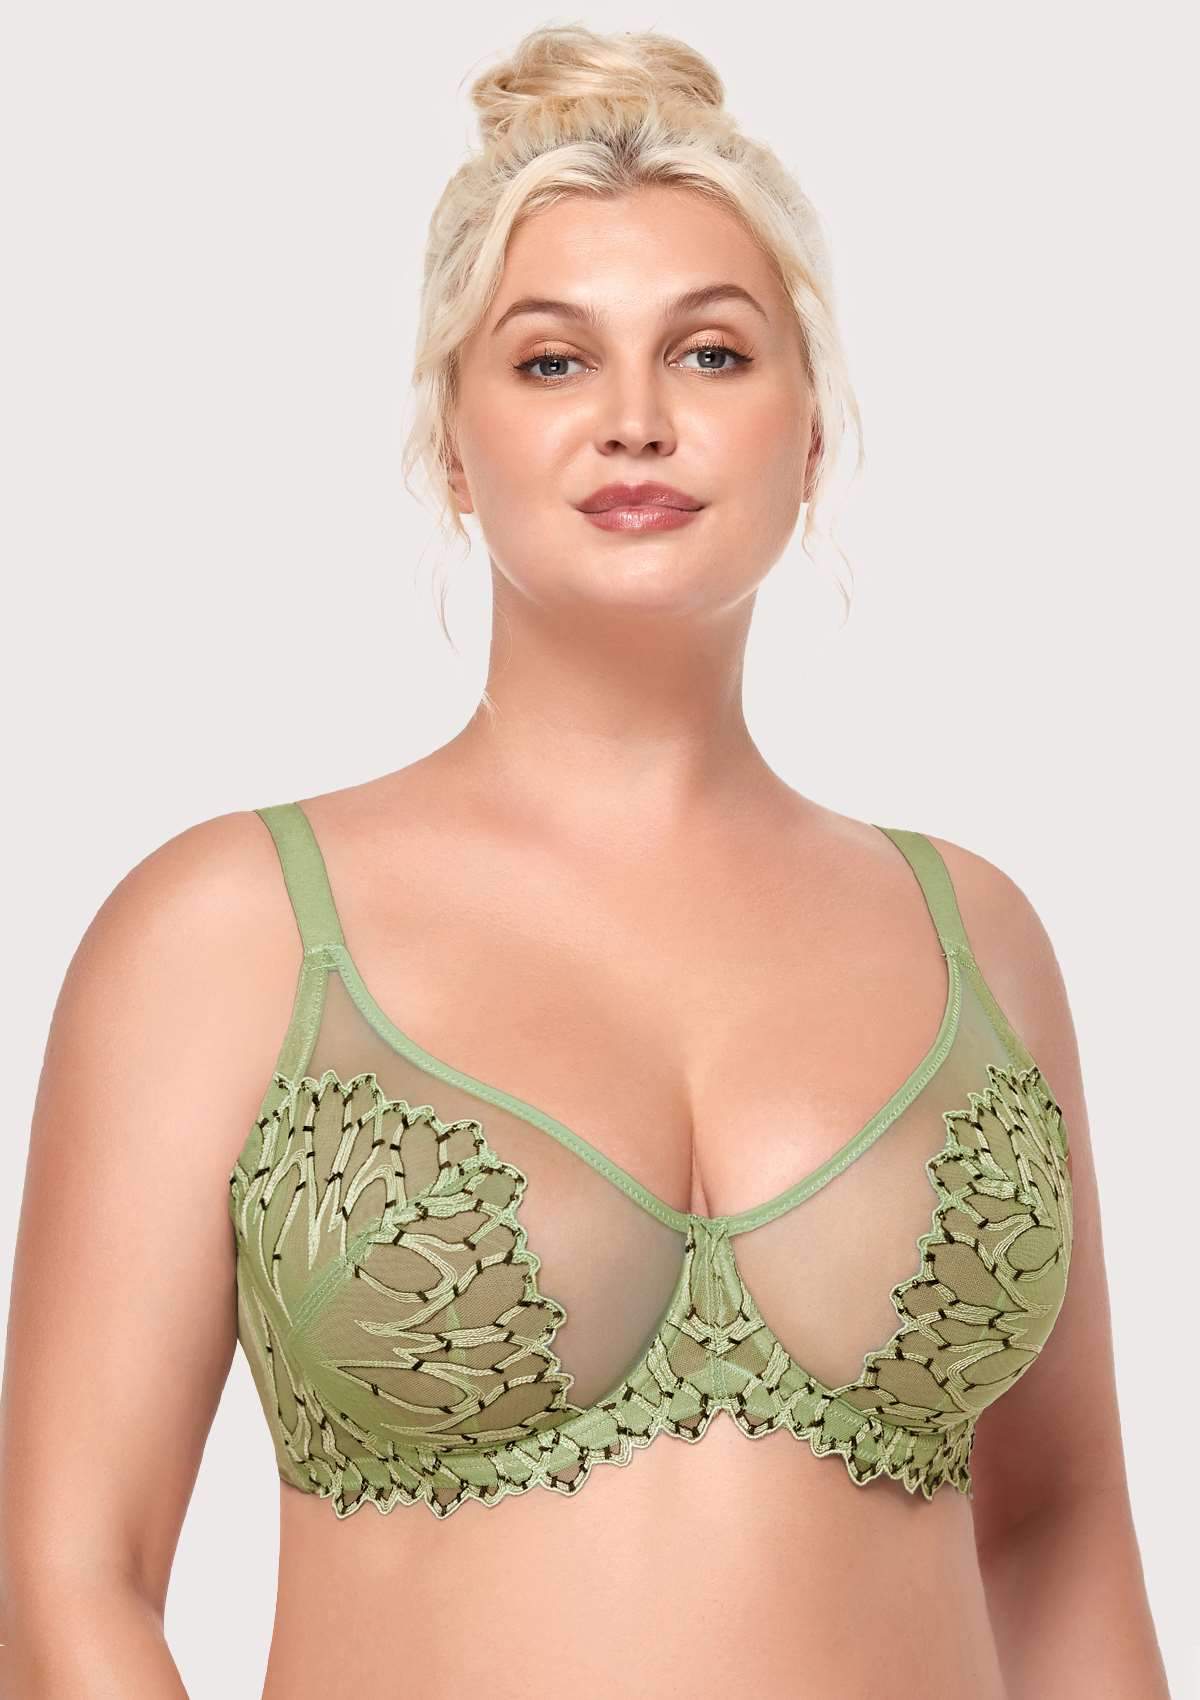 HSIA Chrysanthemum Floral Embroidered Bra: Lace Sheer Unpadded Bra - Green / 36 / C